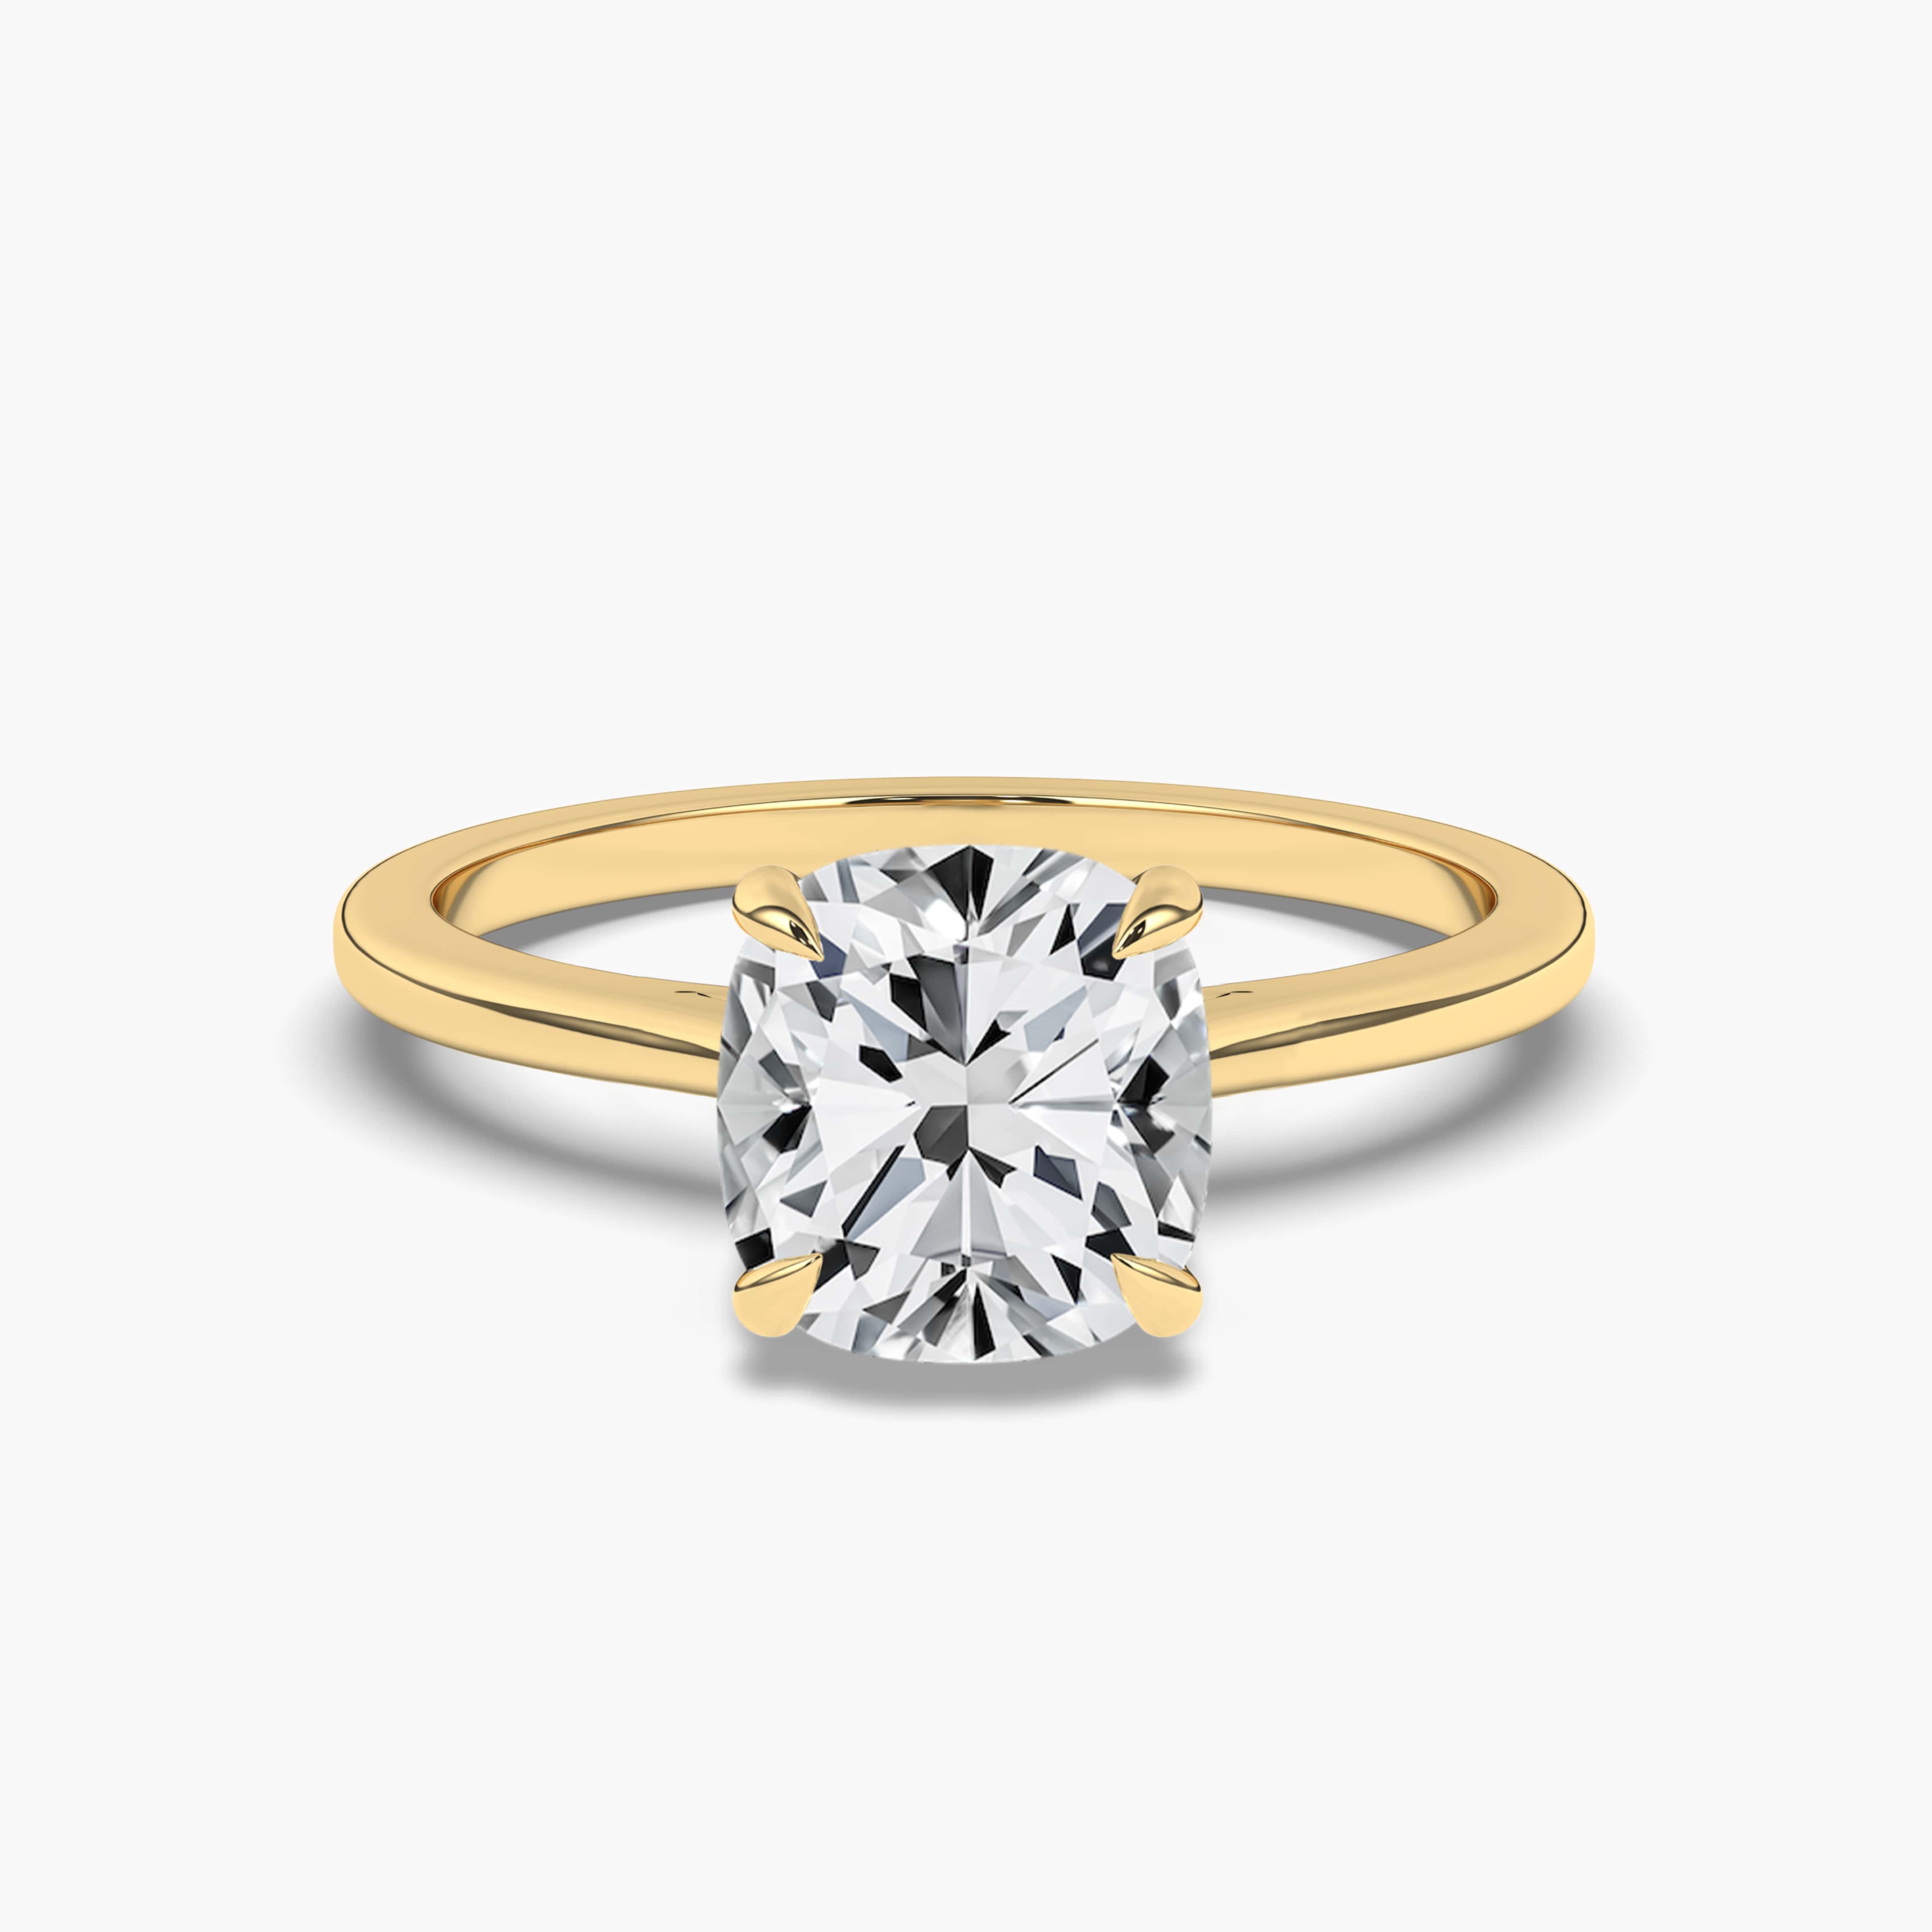 Cushion Cut Solitaire Diamond Engagement Ring Yellow Gold